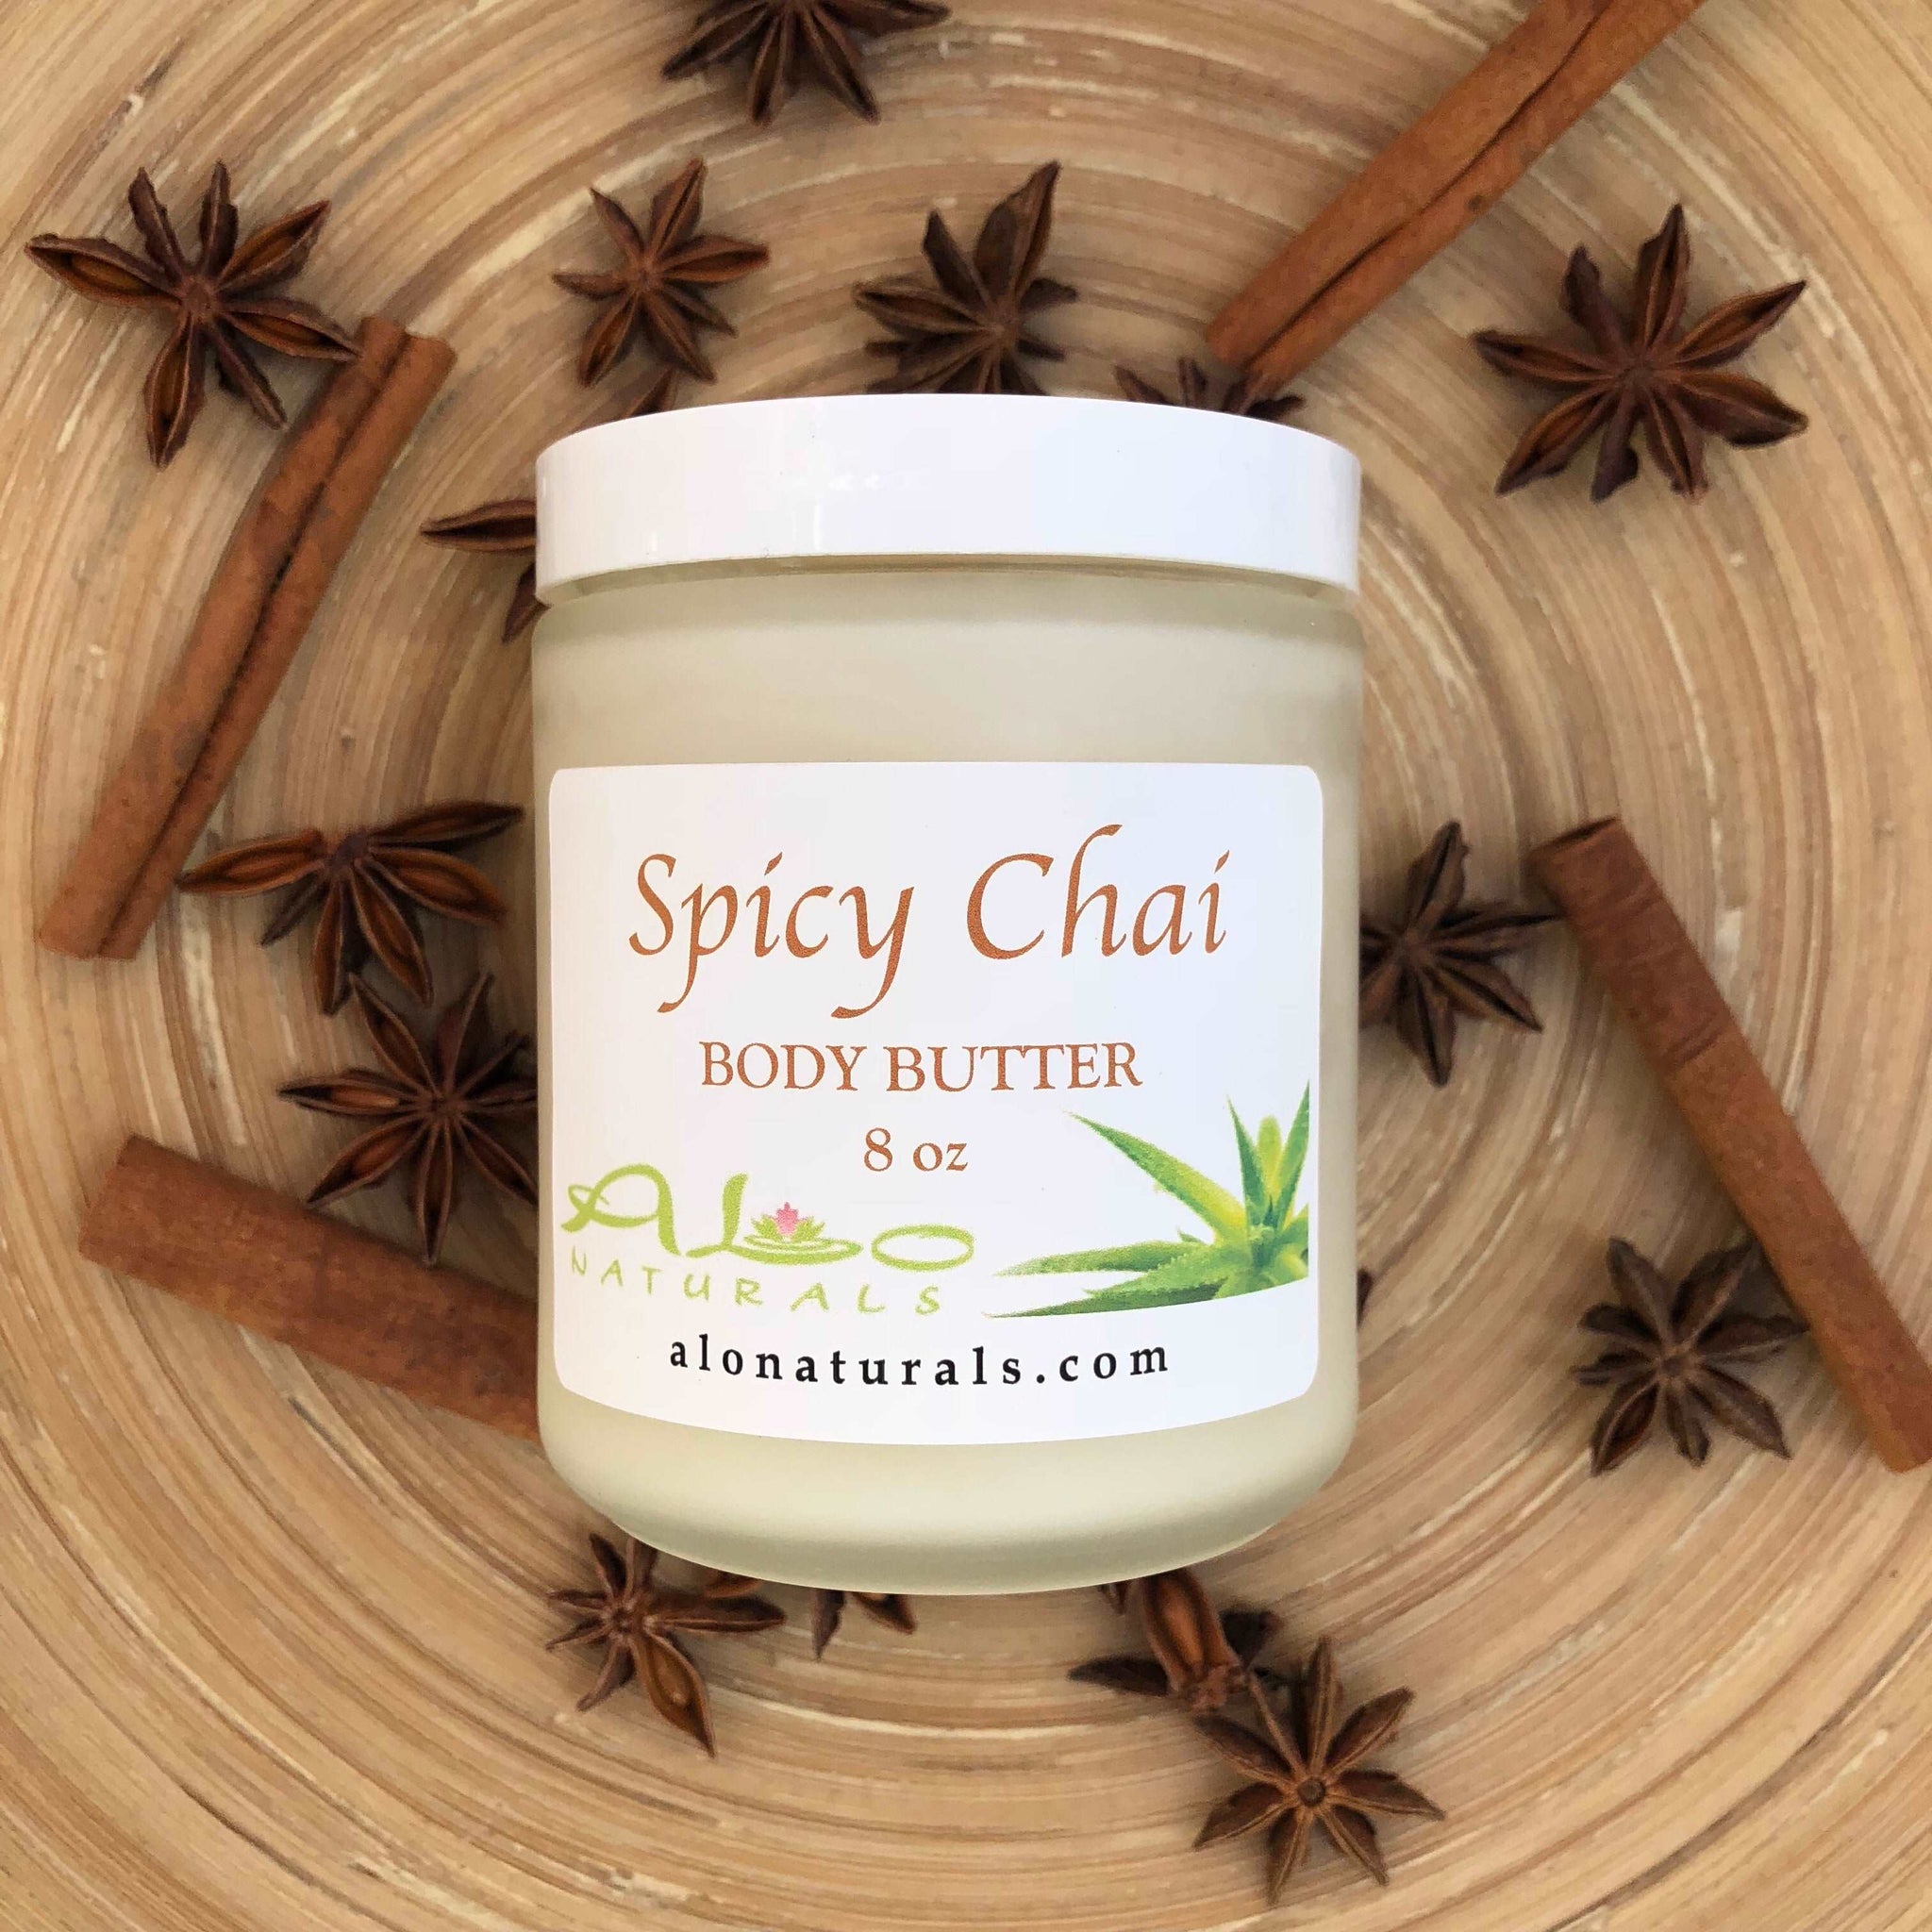 Our natural handmade Spicy Chai body butter makes skin silky soft! It is made of top quality raw ingredients from around the world making it completely unique and high grade. It moisturizes, nourishes and regenerates your skin to promote a healthy and radiant glow!